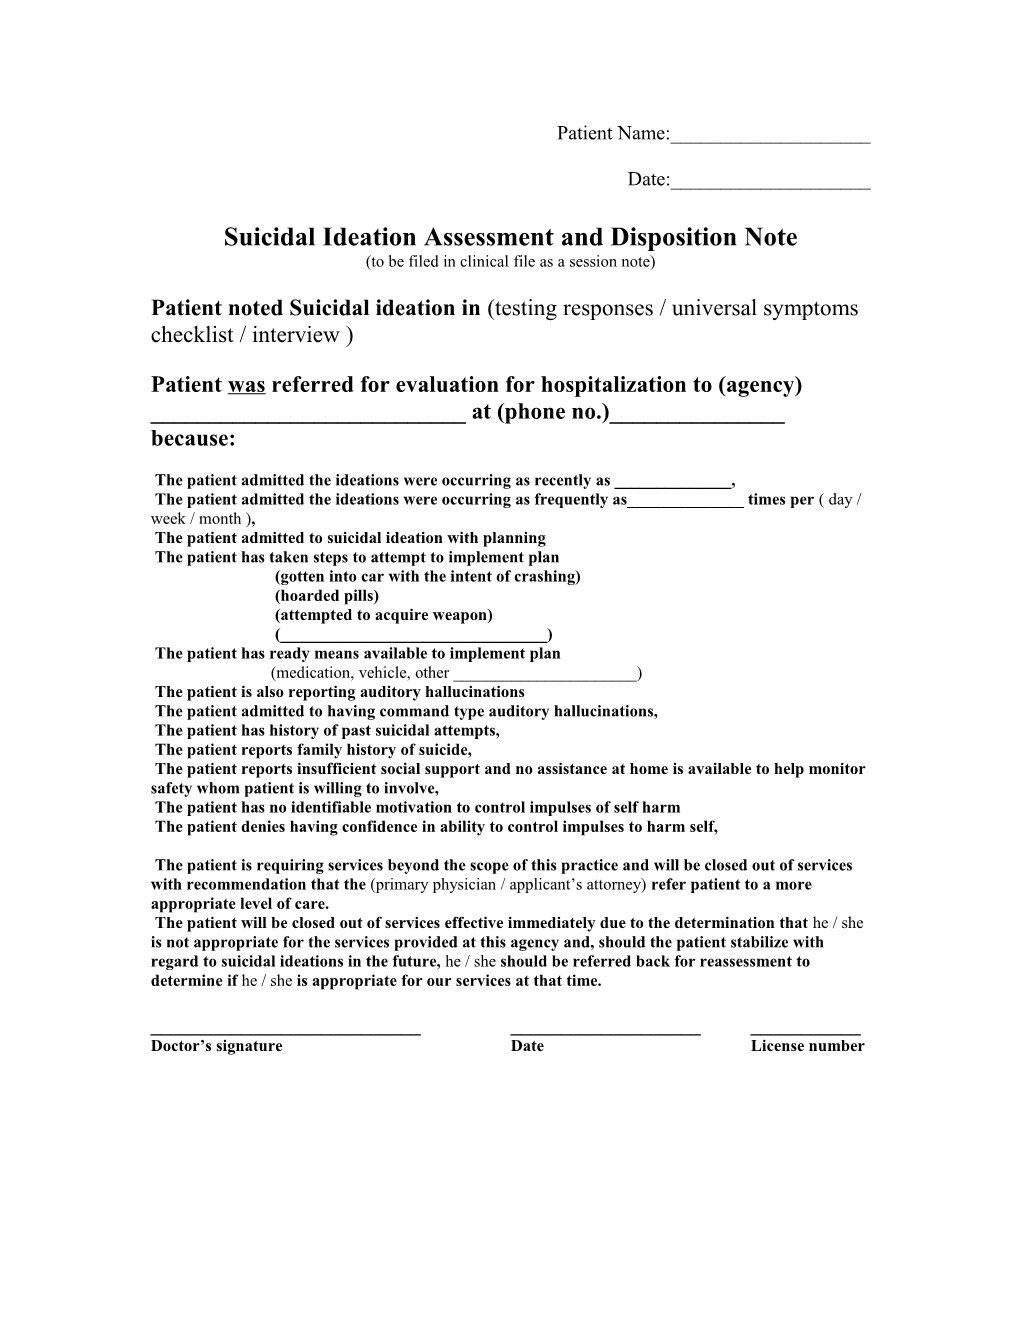 Suicidal Ideation Assessment and Deposition Note